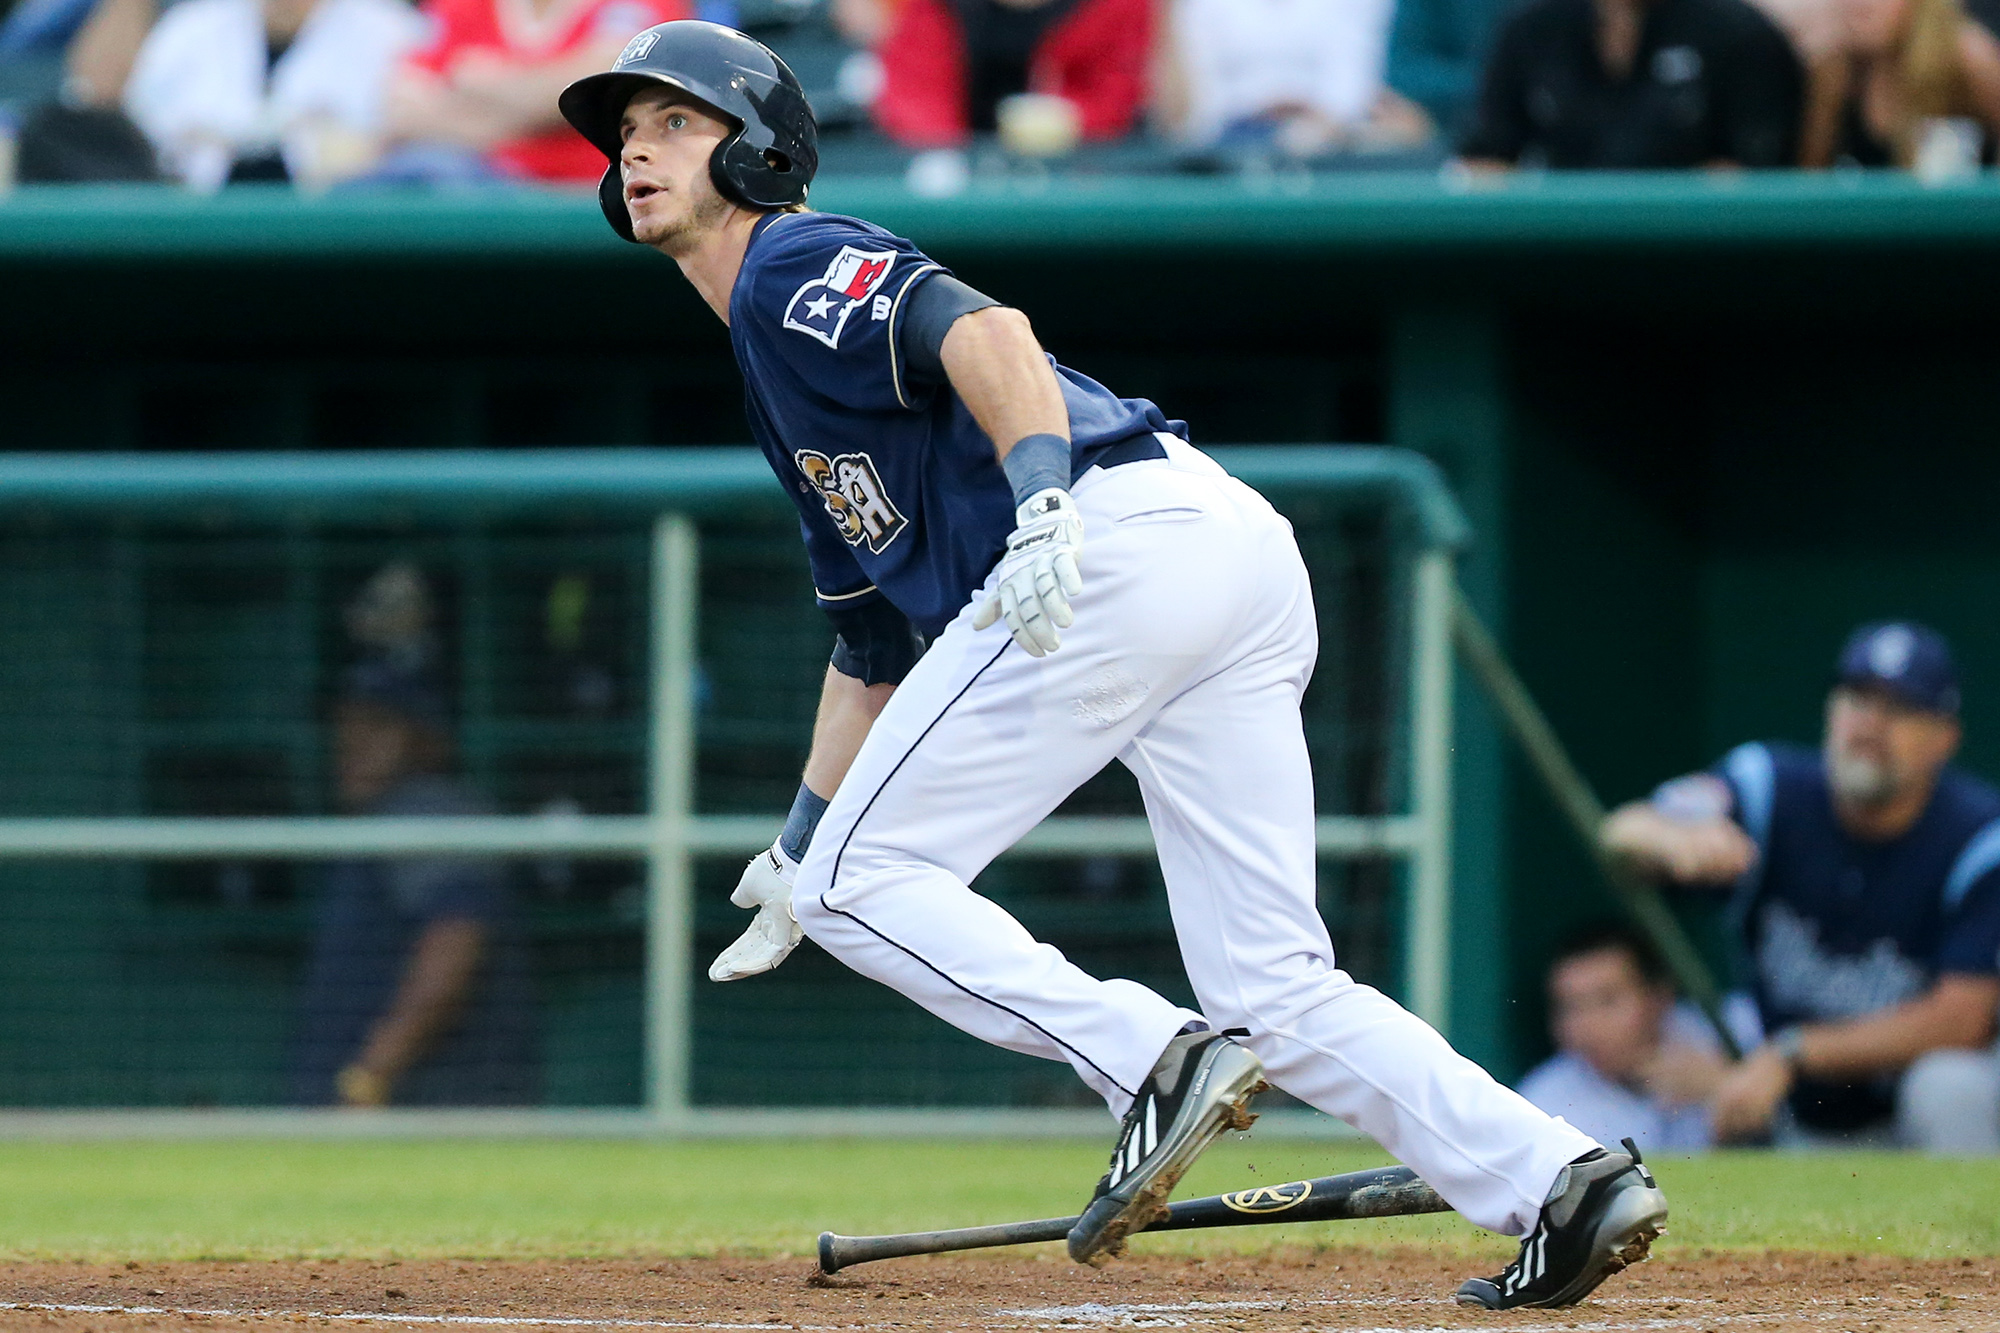 Missions' Jankowski a sure catch in center field